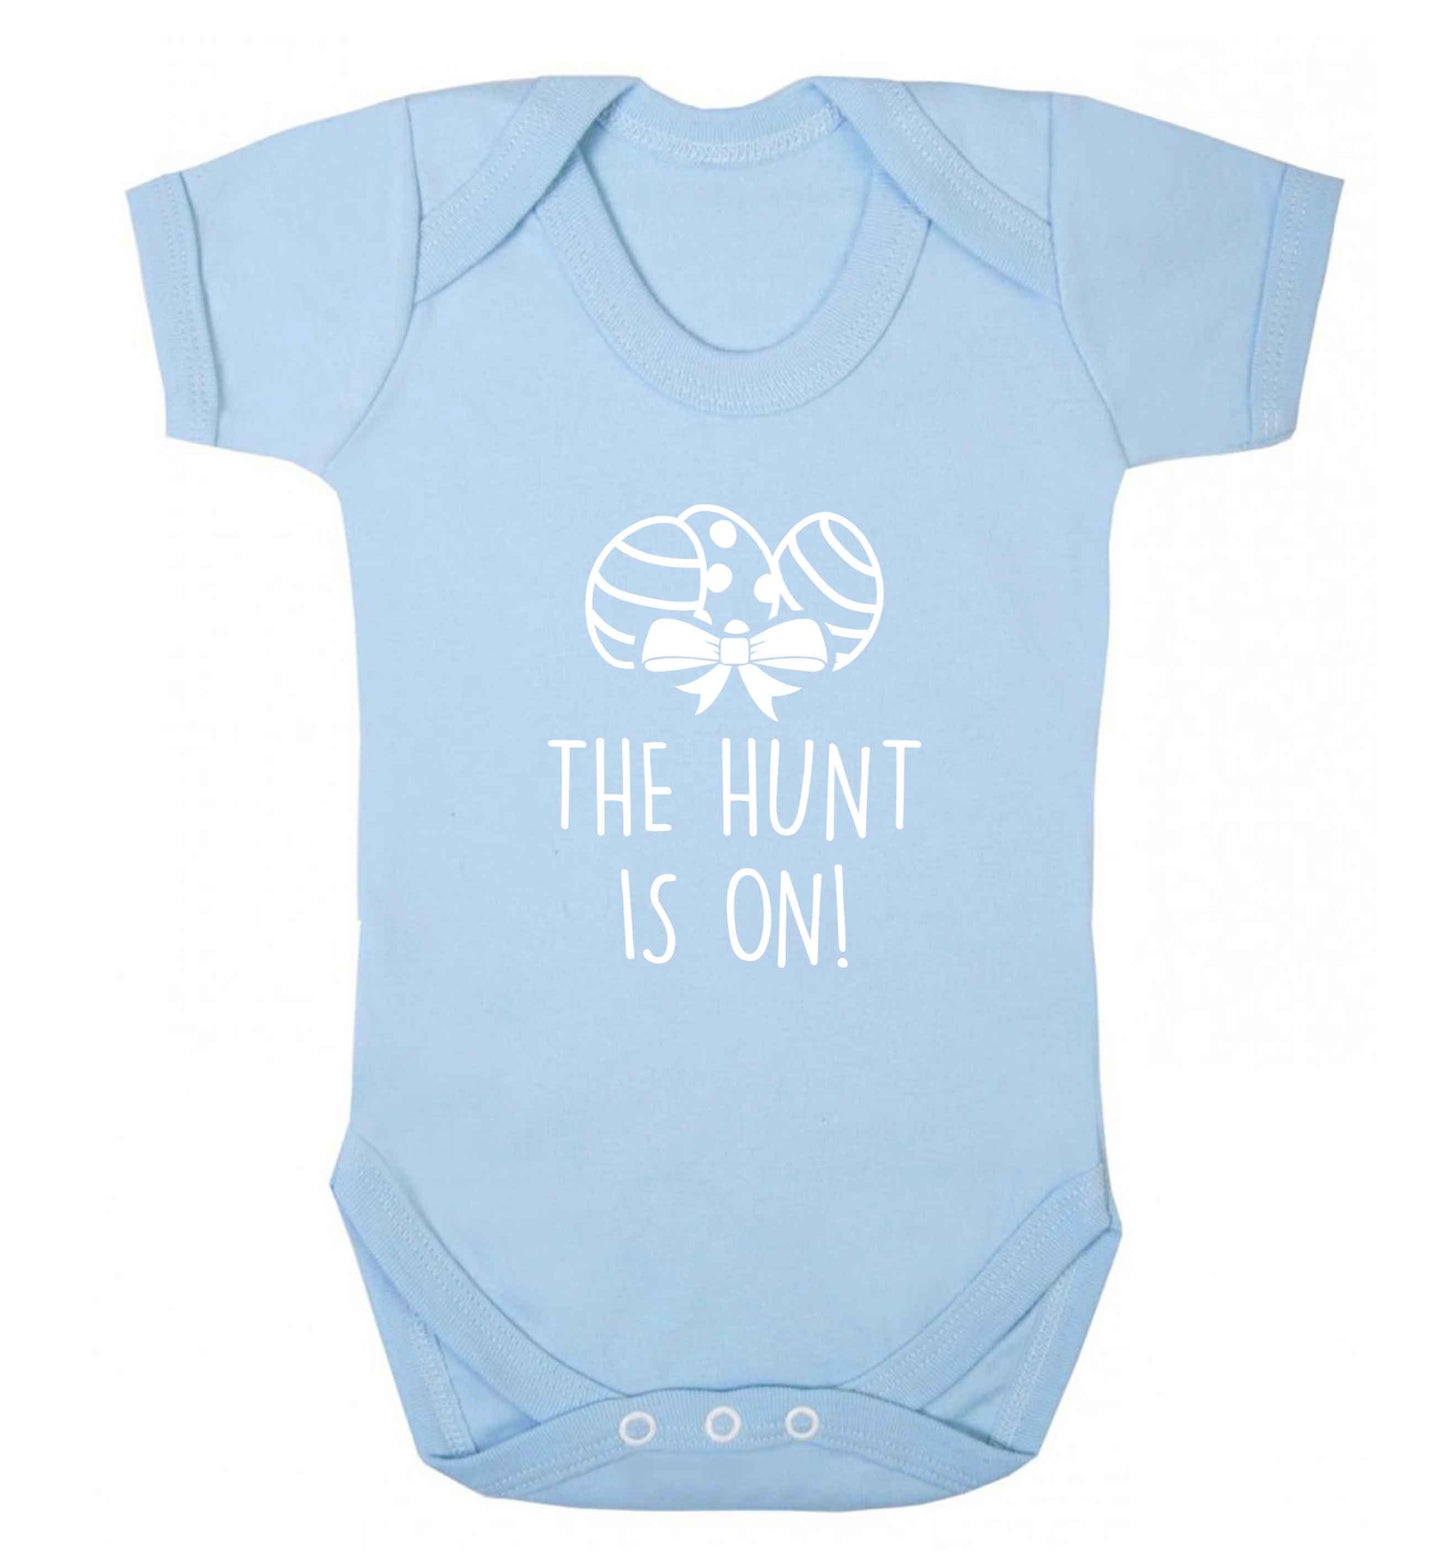 The hunt is on baby vest pale blue 18-24 months